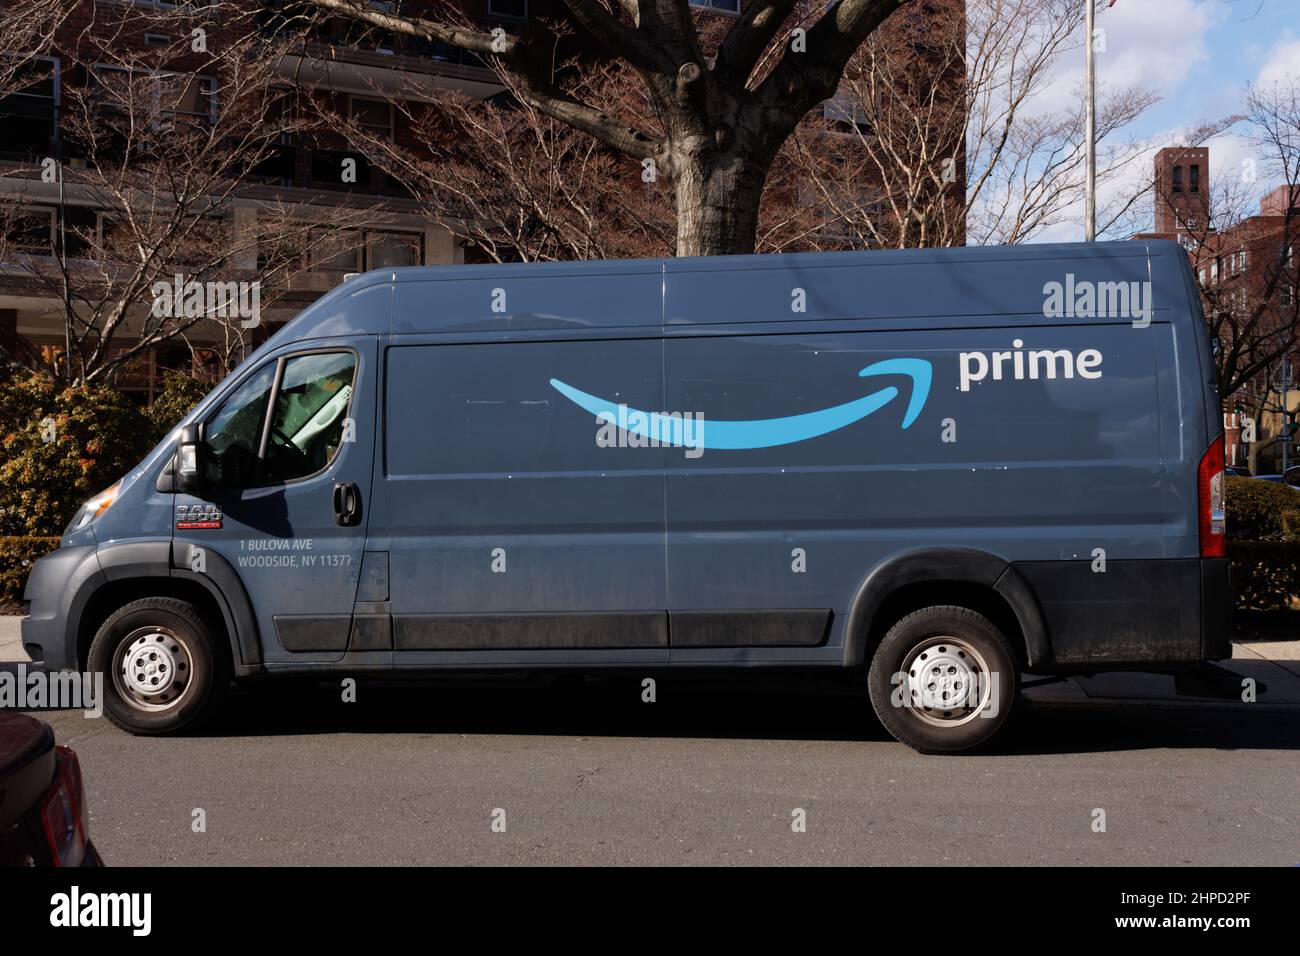 Amazon prime delivery van or truck parked on a street in Queens, New York Stock Photo